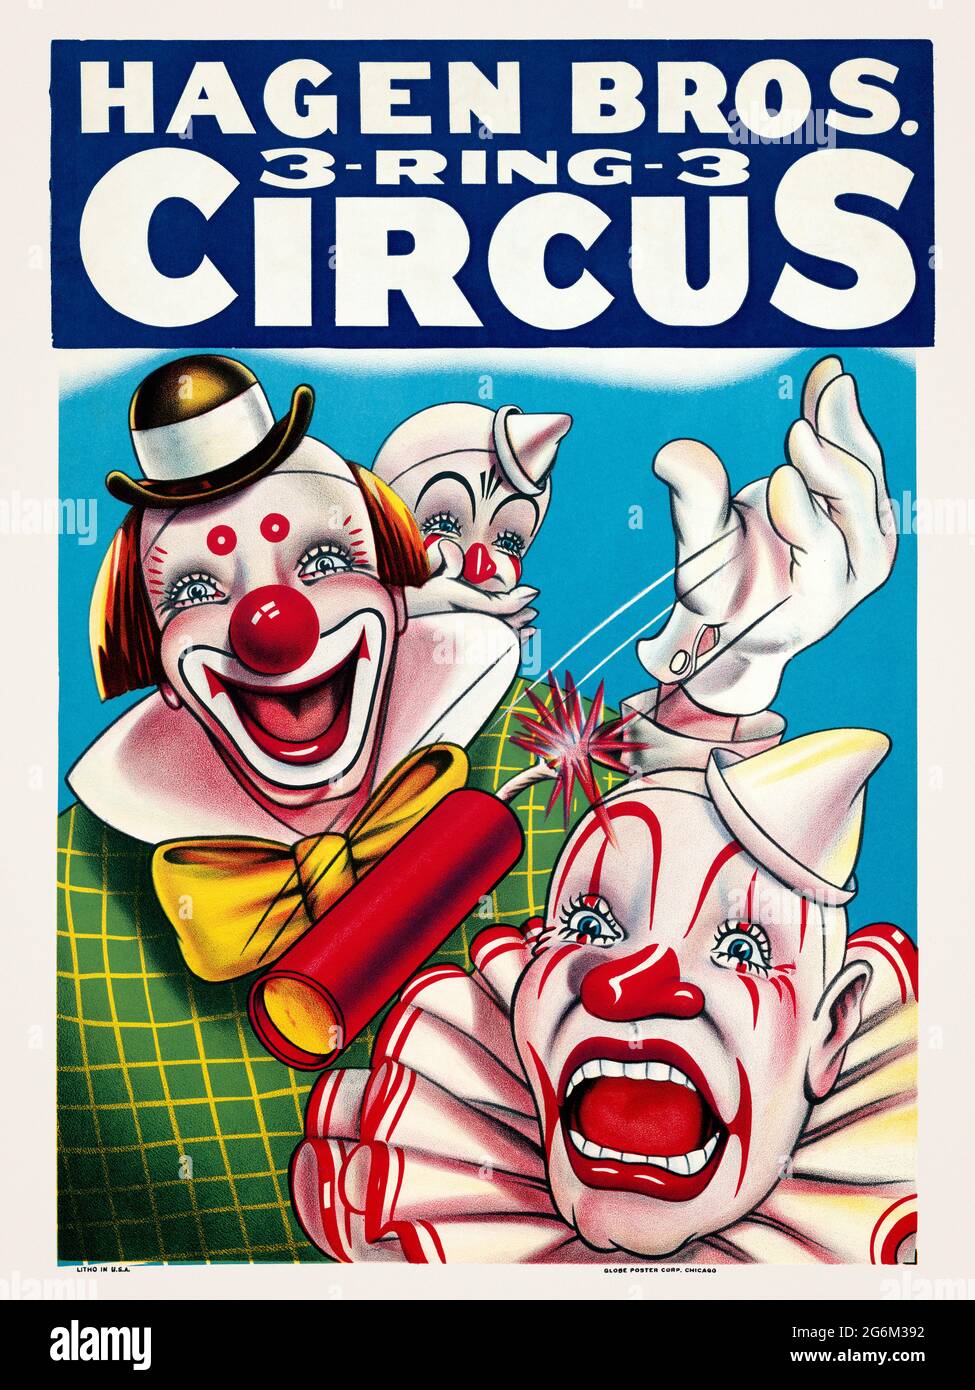 Hagen Bros. 3-Ring-3 Circus. Artist unknown. Restored vintage poster published ca.1950s in the USA. Stock Photo